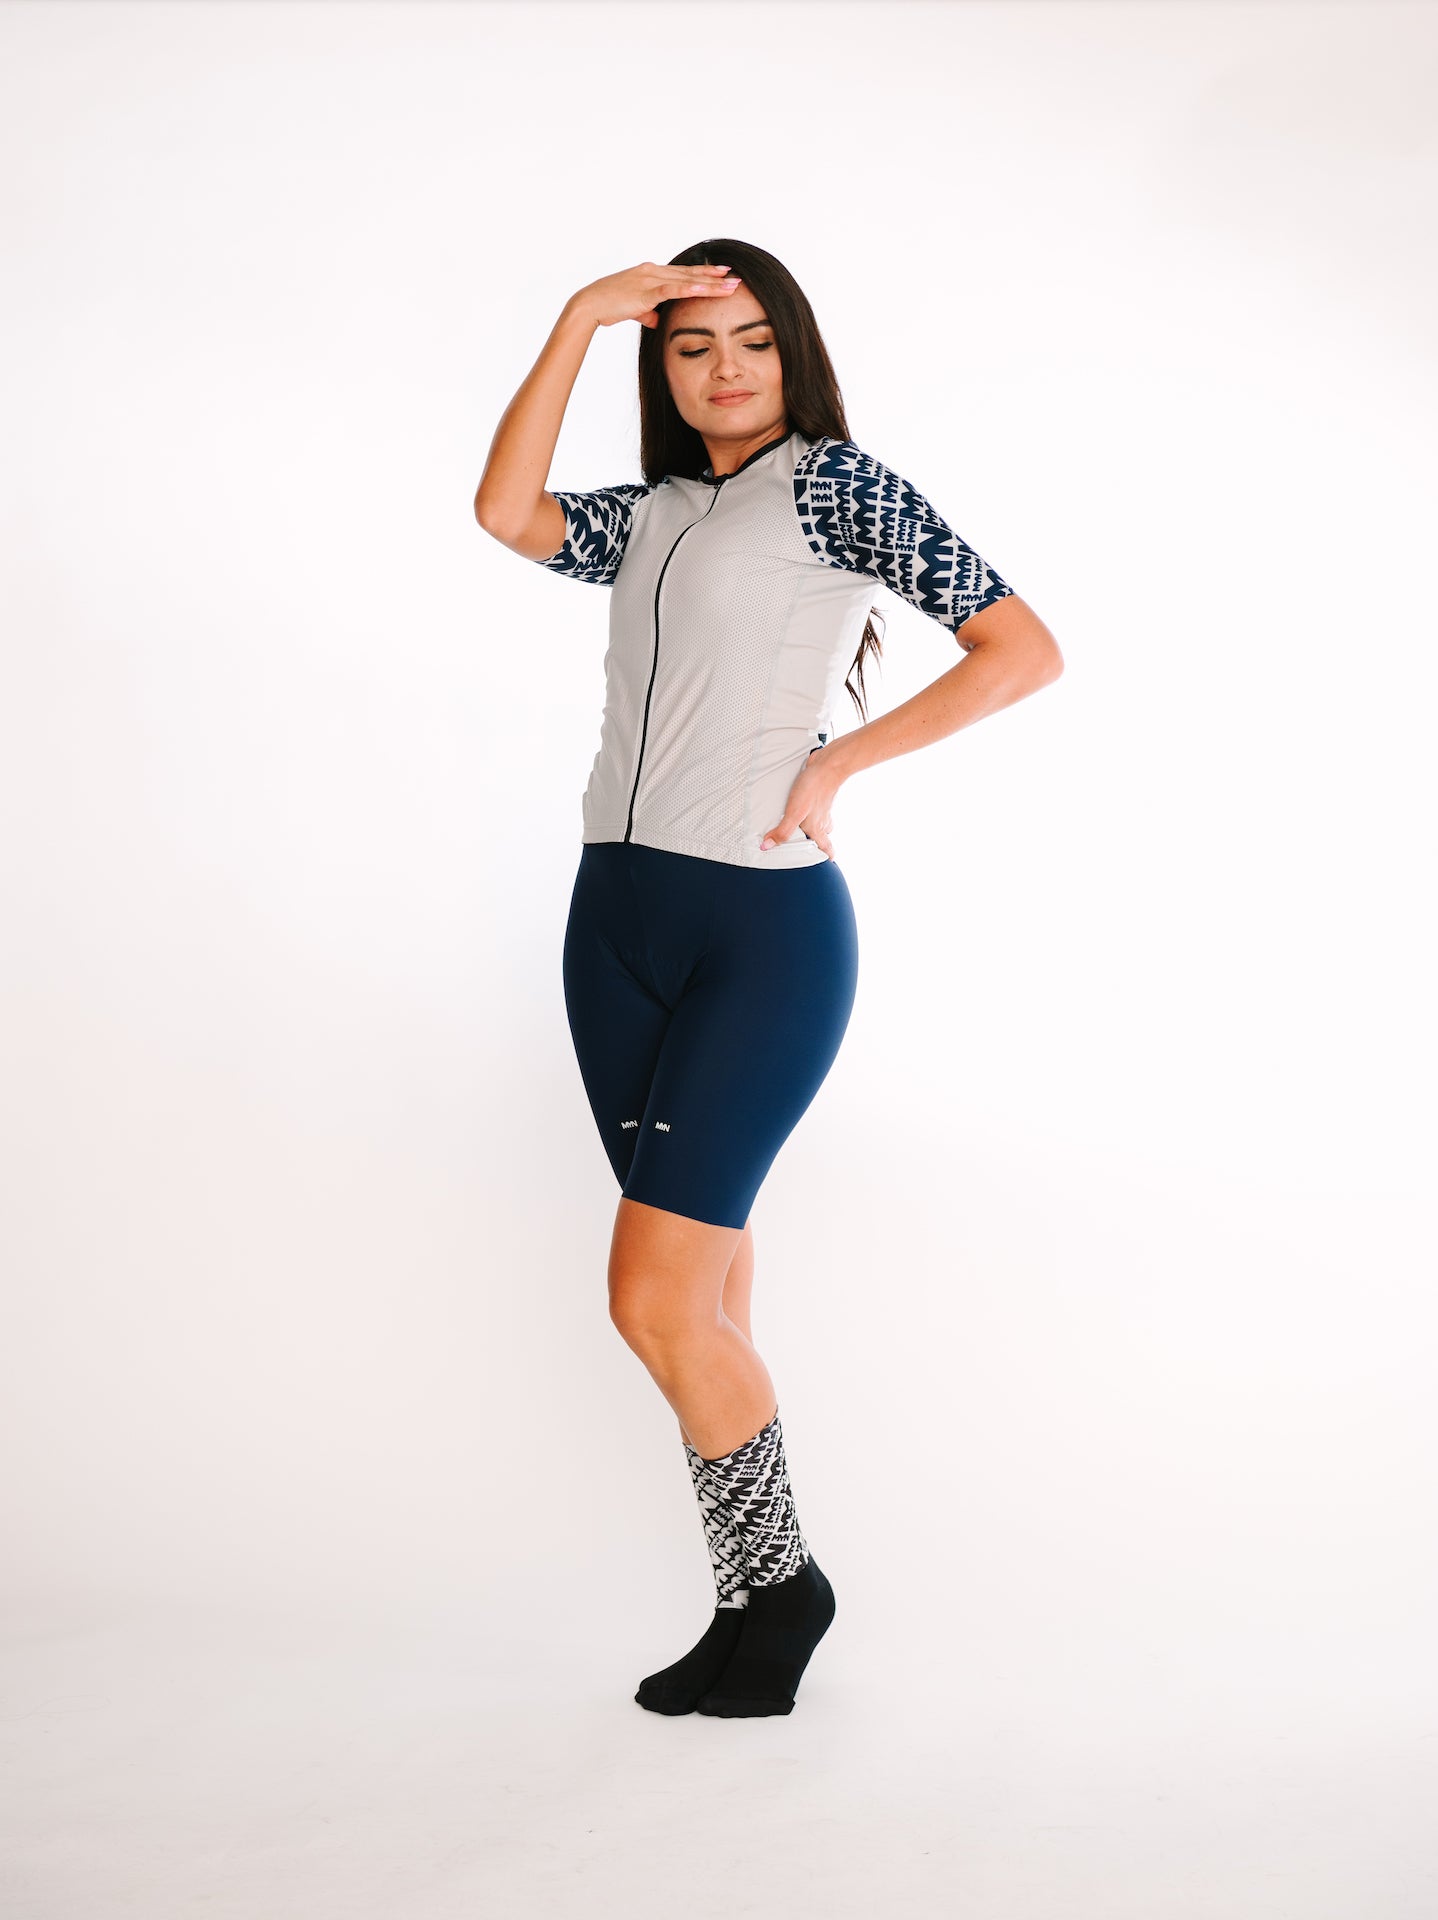 PARDY Cycling Jersey for Women